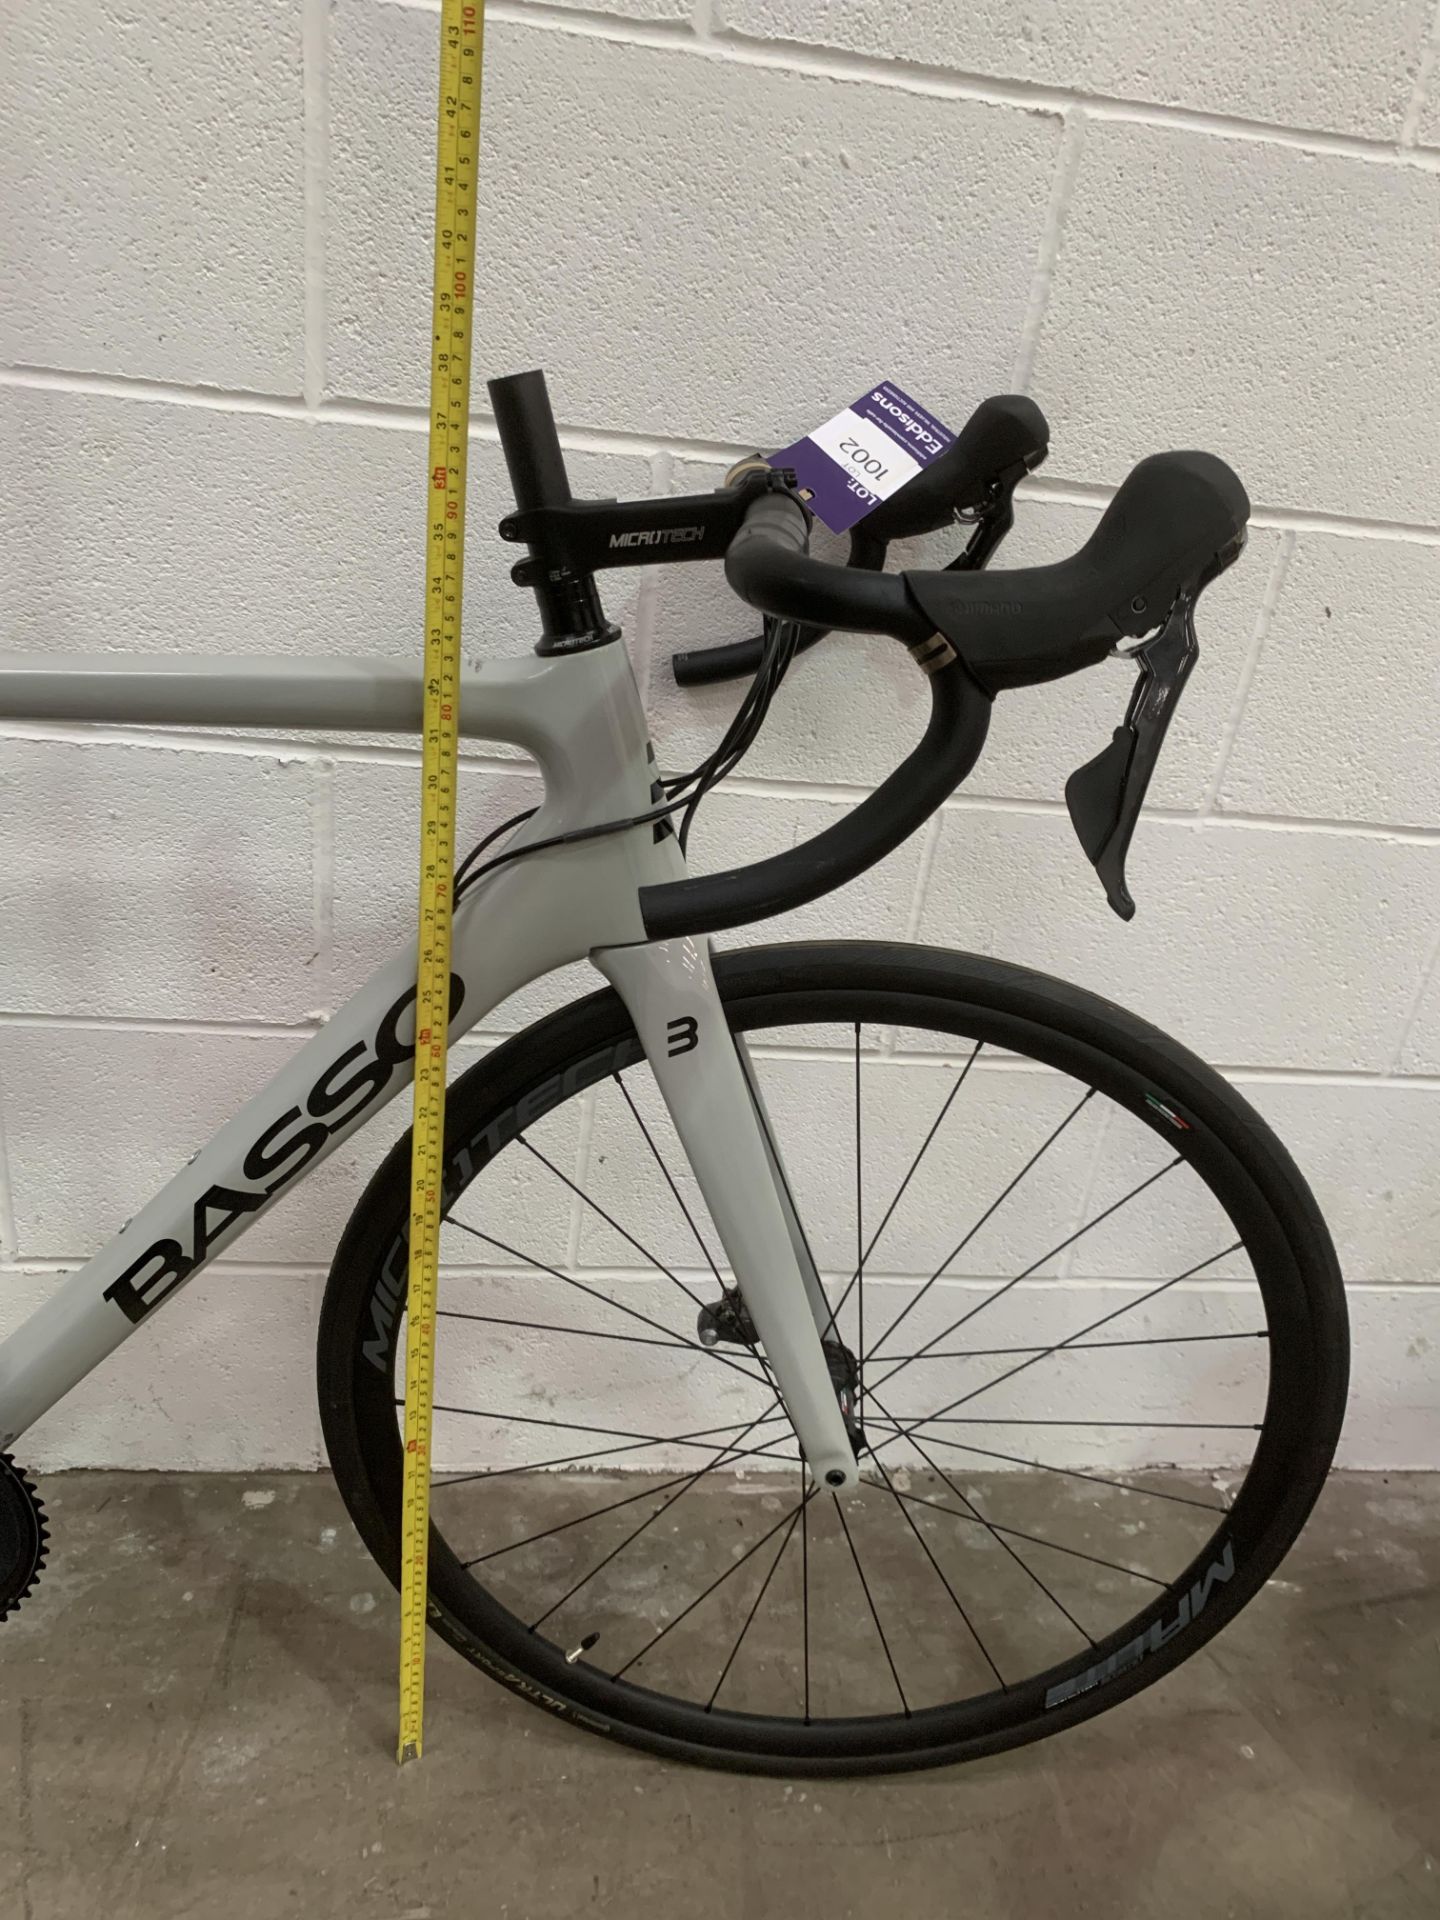 Basso Venta Disk 'Stone Grey' Bicycle. RRP £2899 - Image 9 of 10